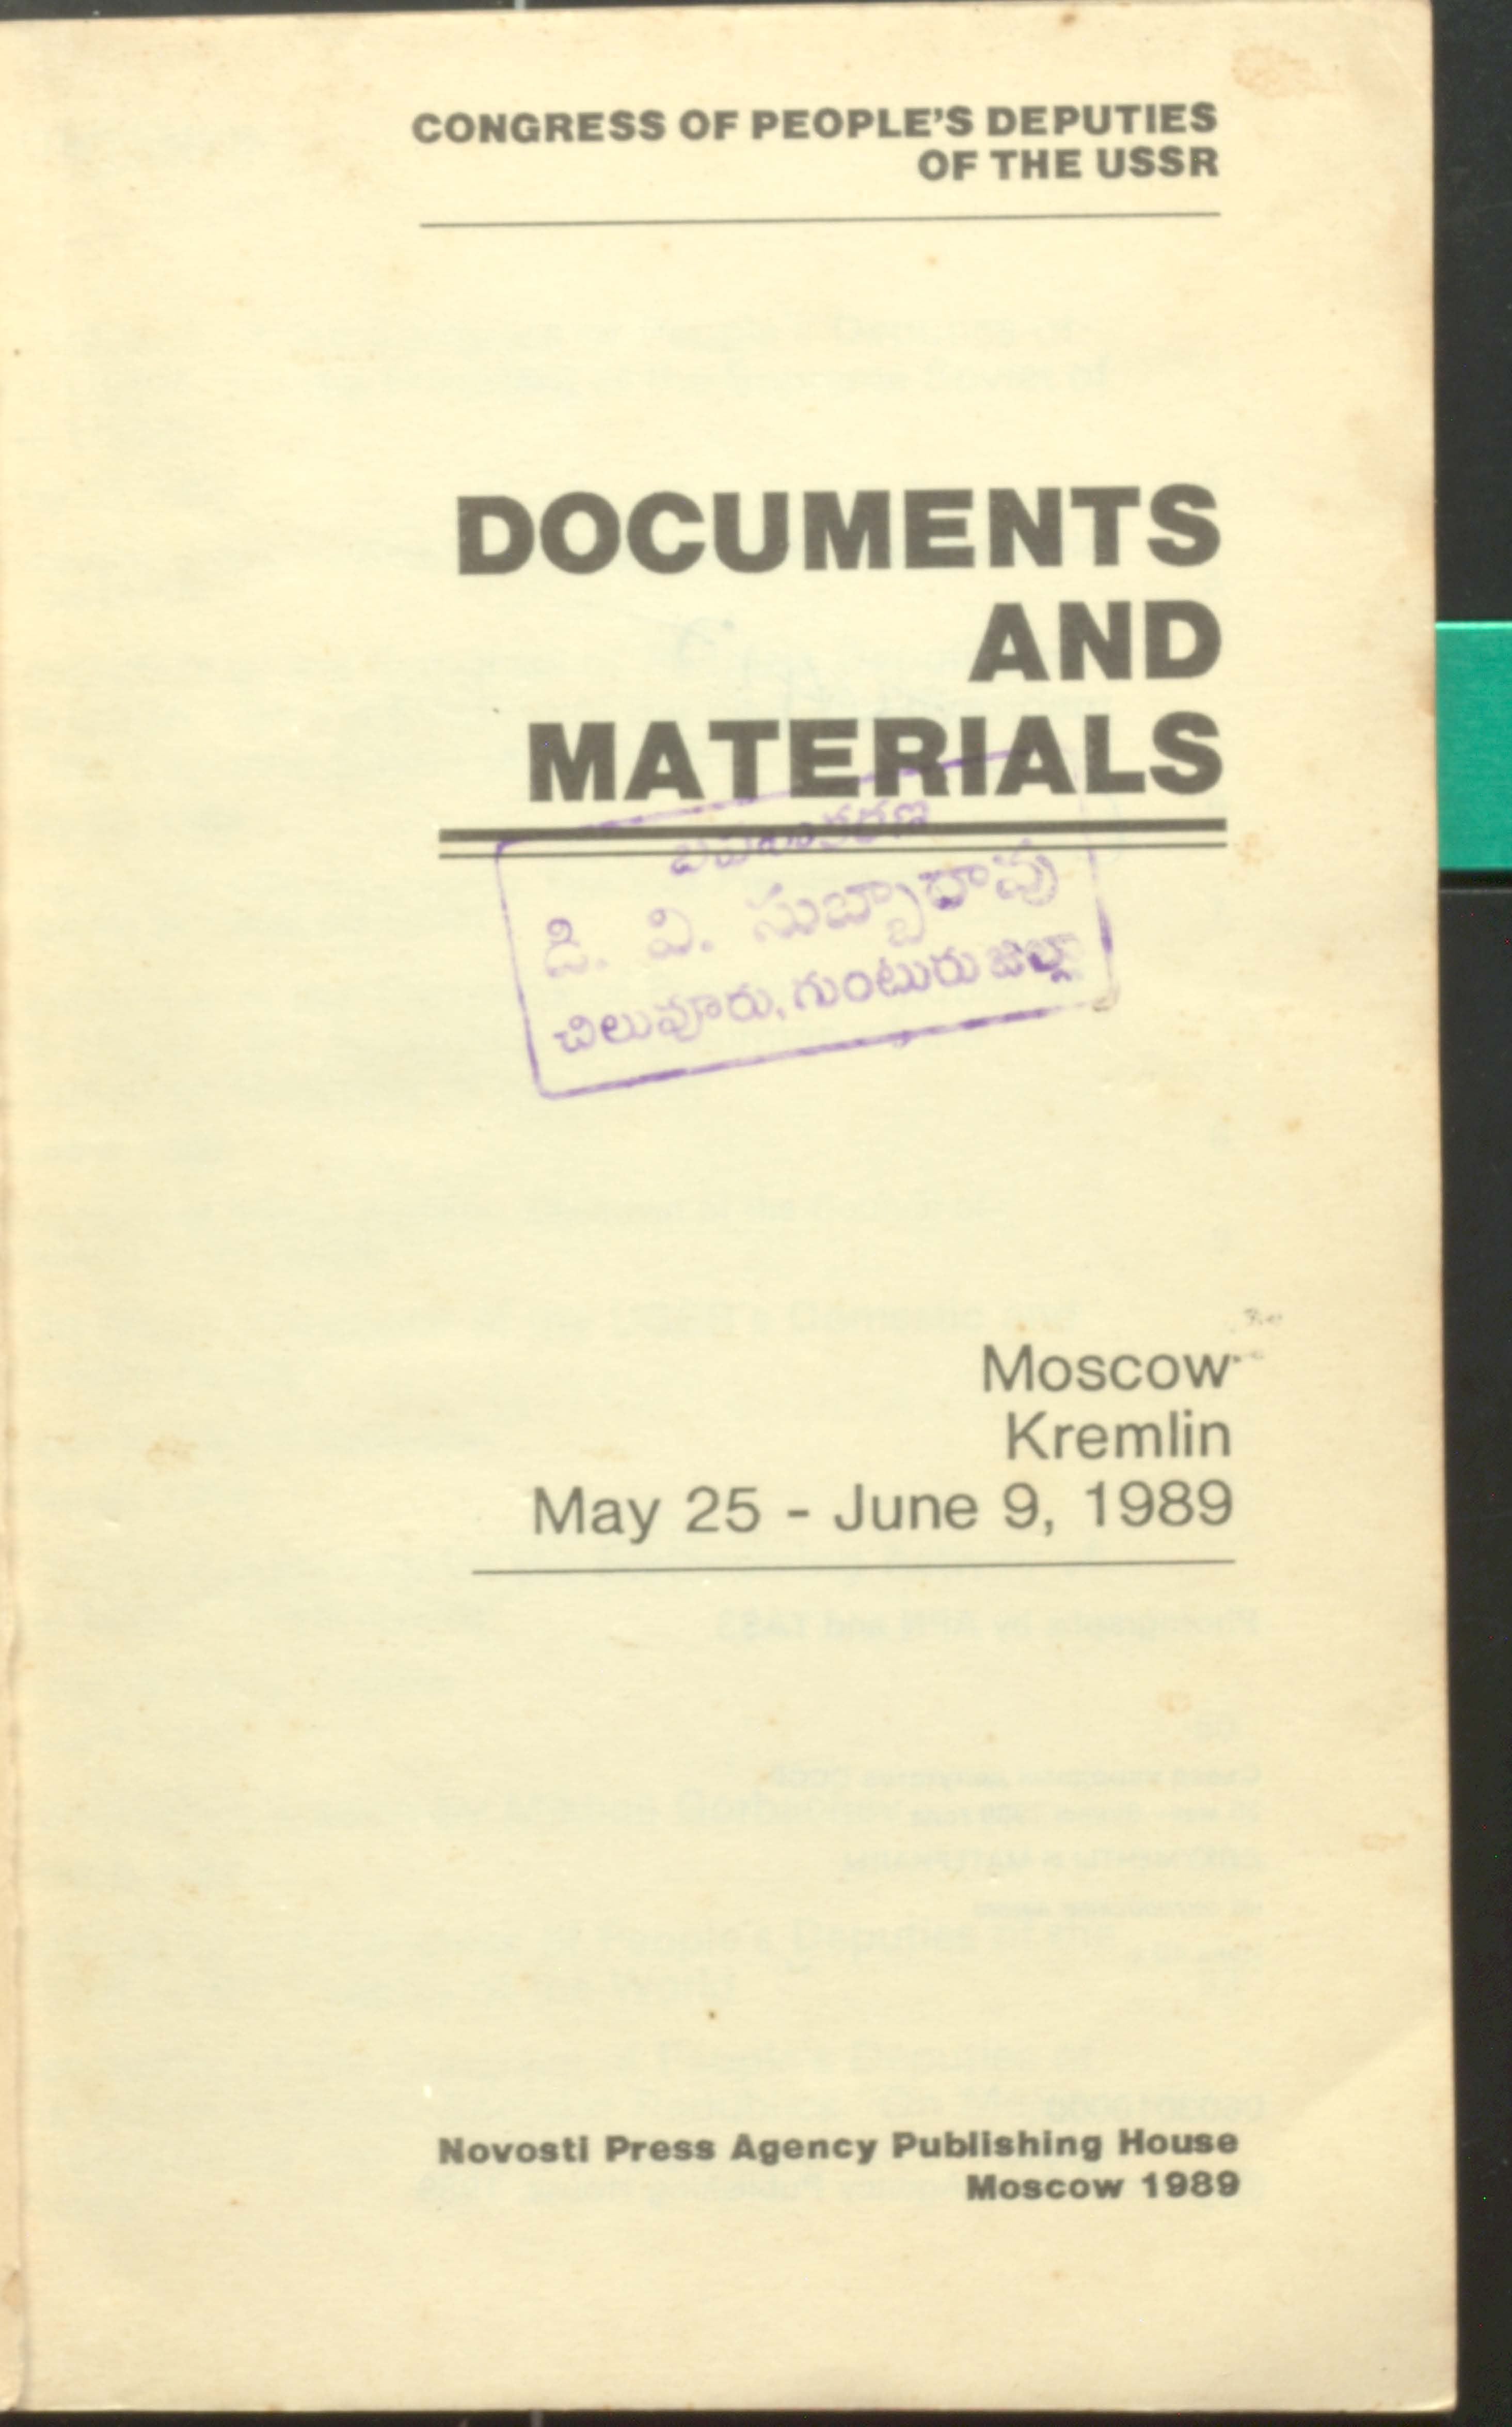 DOCUMENTS AND MATERIALS moscow kremlin may25-june9,1989